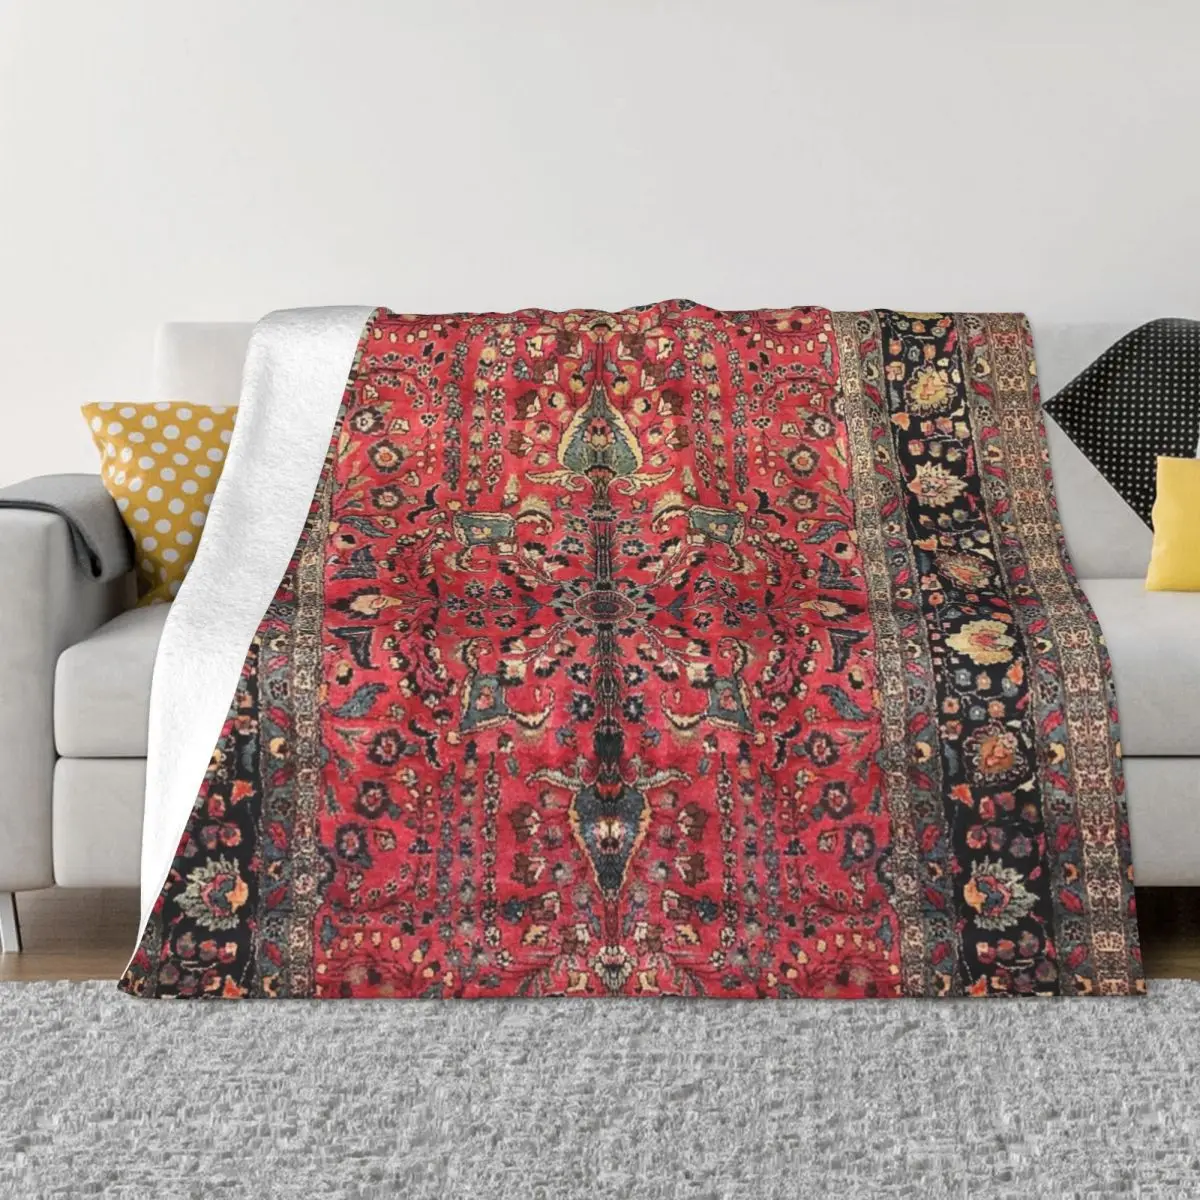 

Antique Persian Red Rug Coral Fleece Air Conditioner Blanket Velvet Shaggy Fuzzy Quilt Home Sofa Bedroom Bedding Throws Child